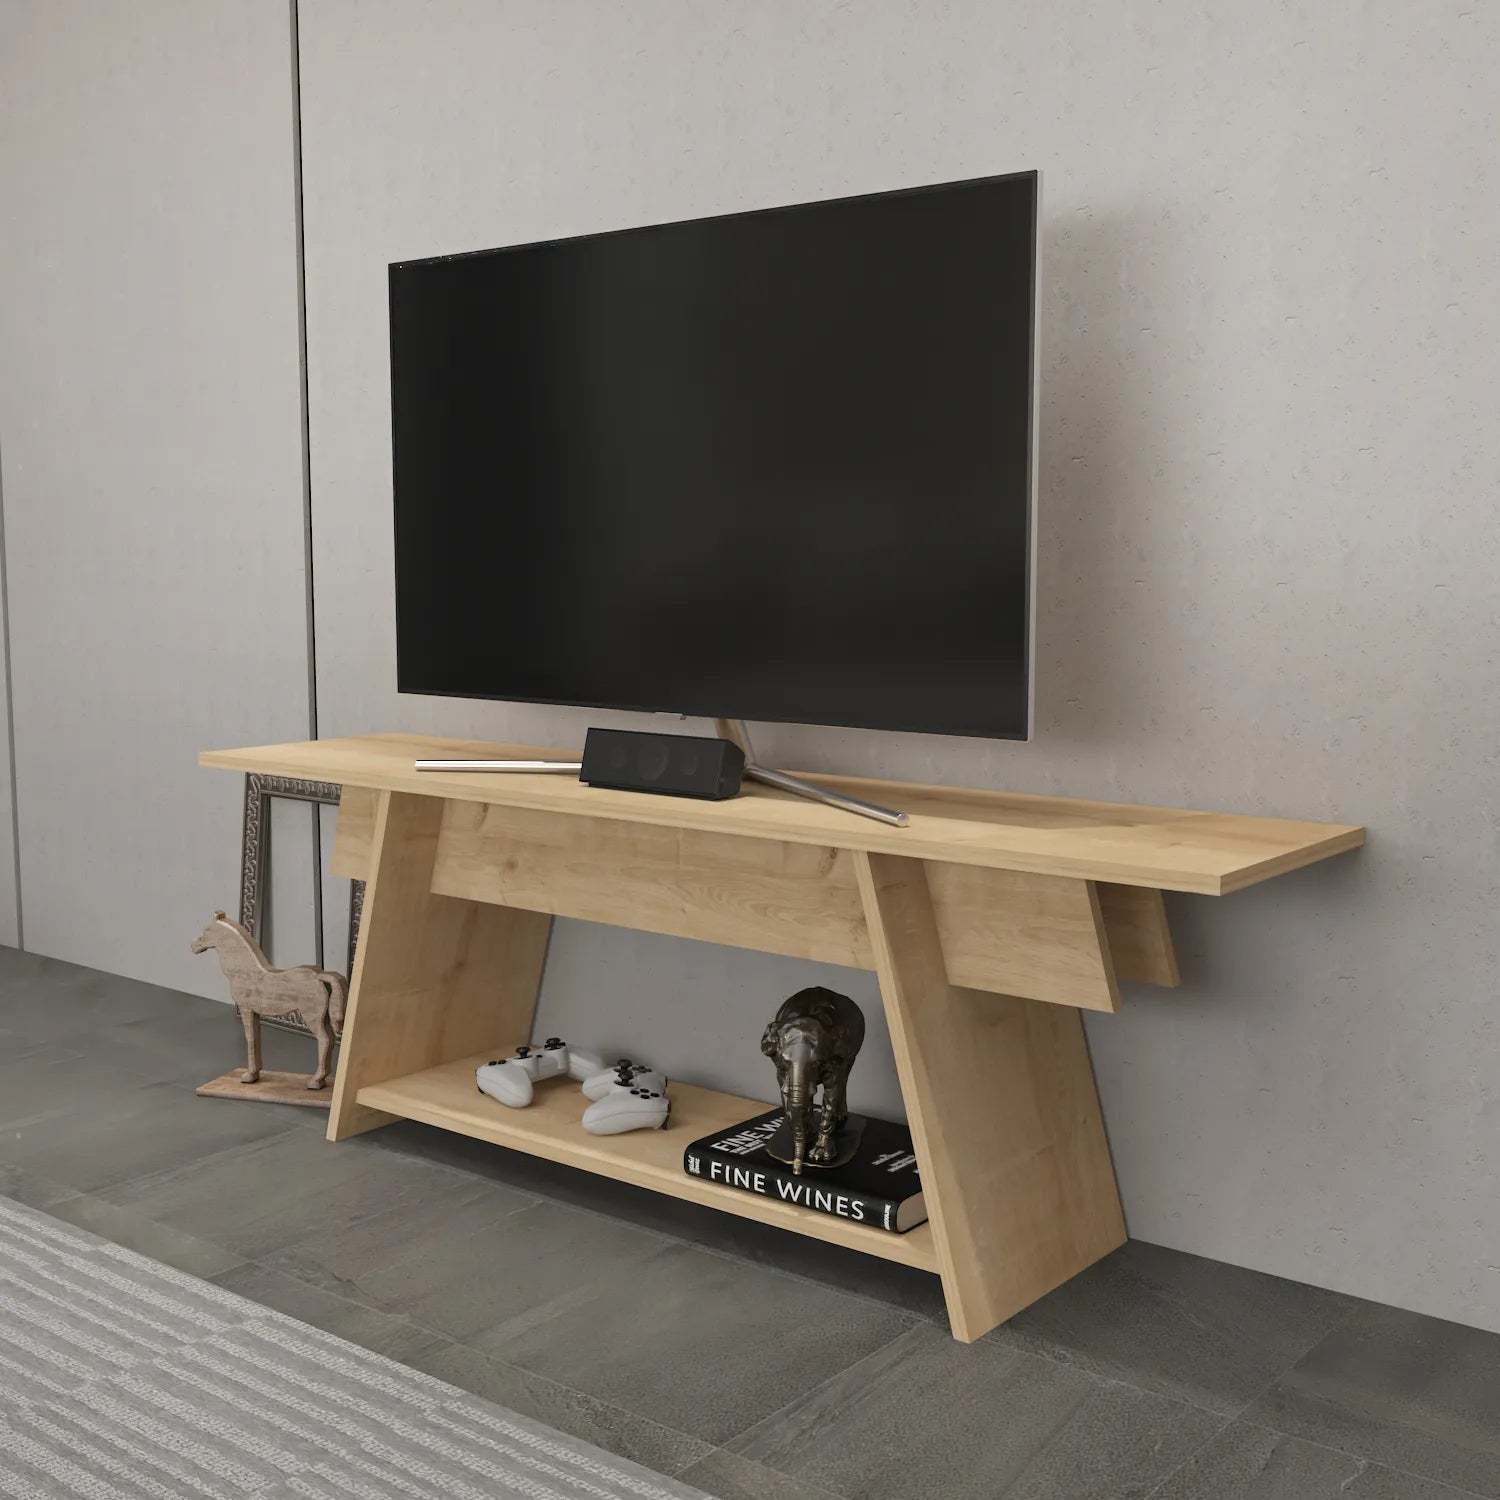 Lanca 59" Wide Minimalist TV Stand Media Console | Streamlined Design for TVs up to 68"